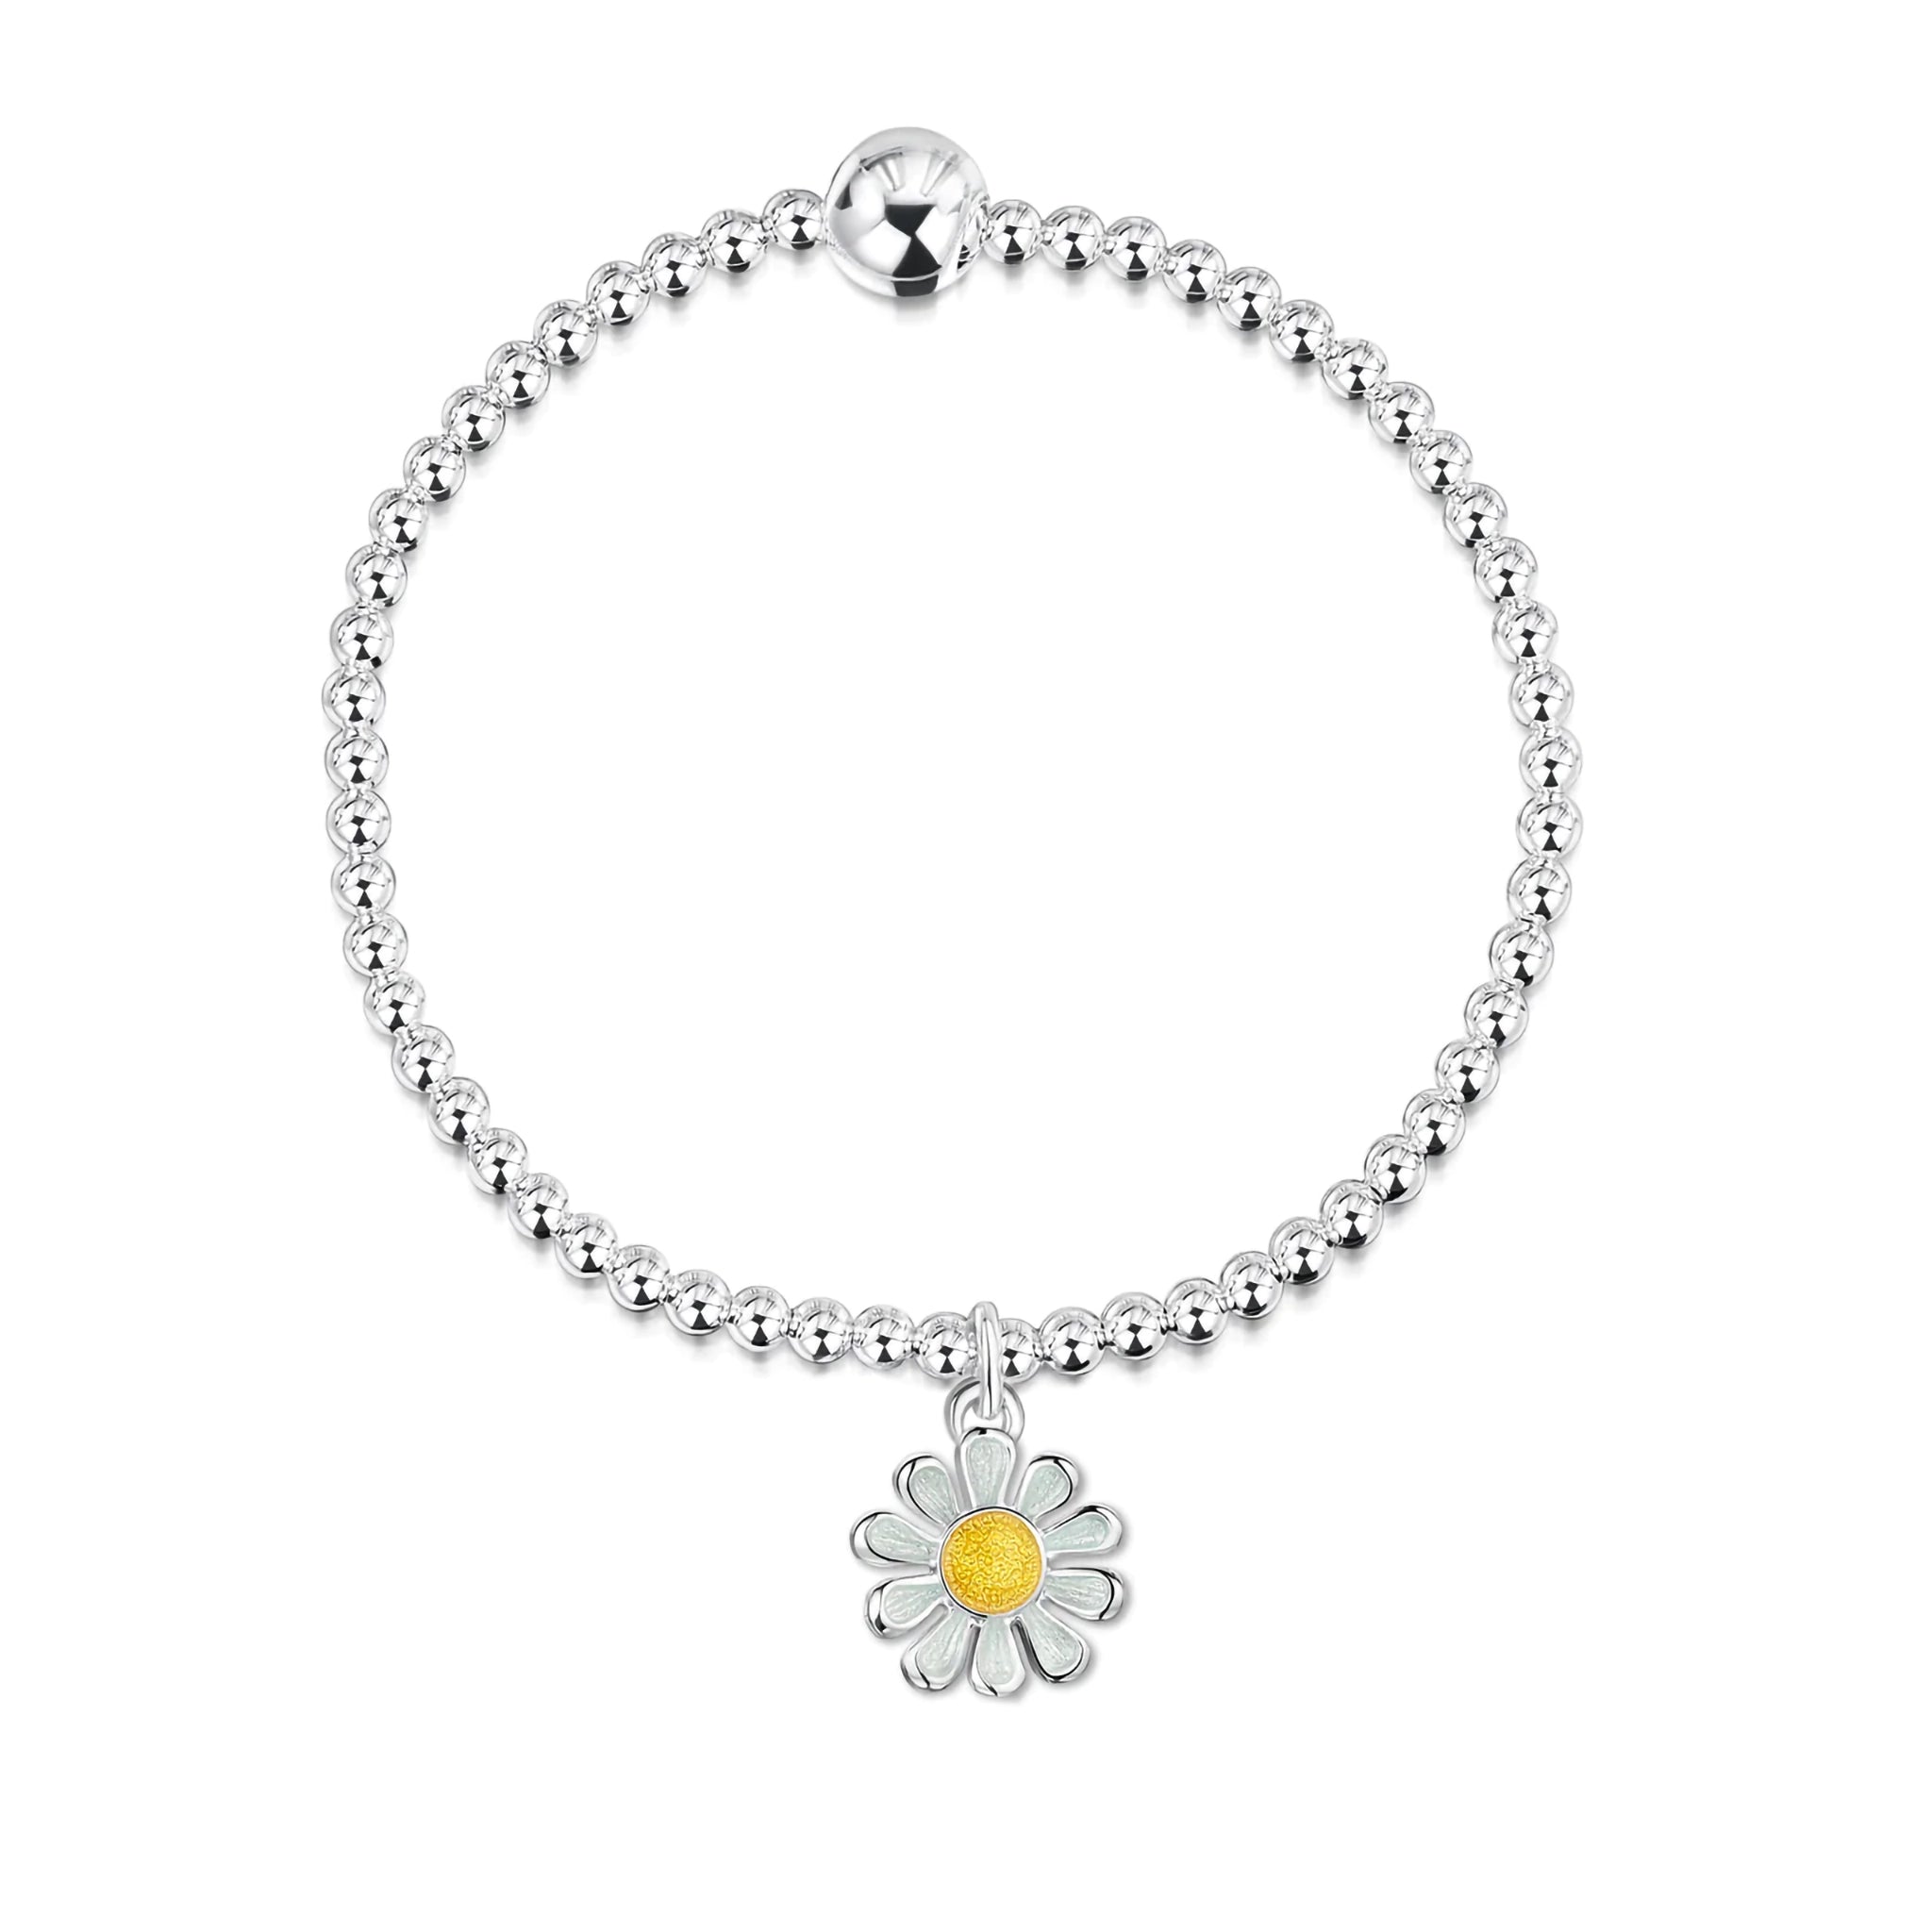 A silver beaded bracelet with a small enamelled daisy pendant